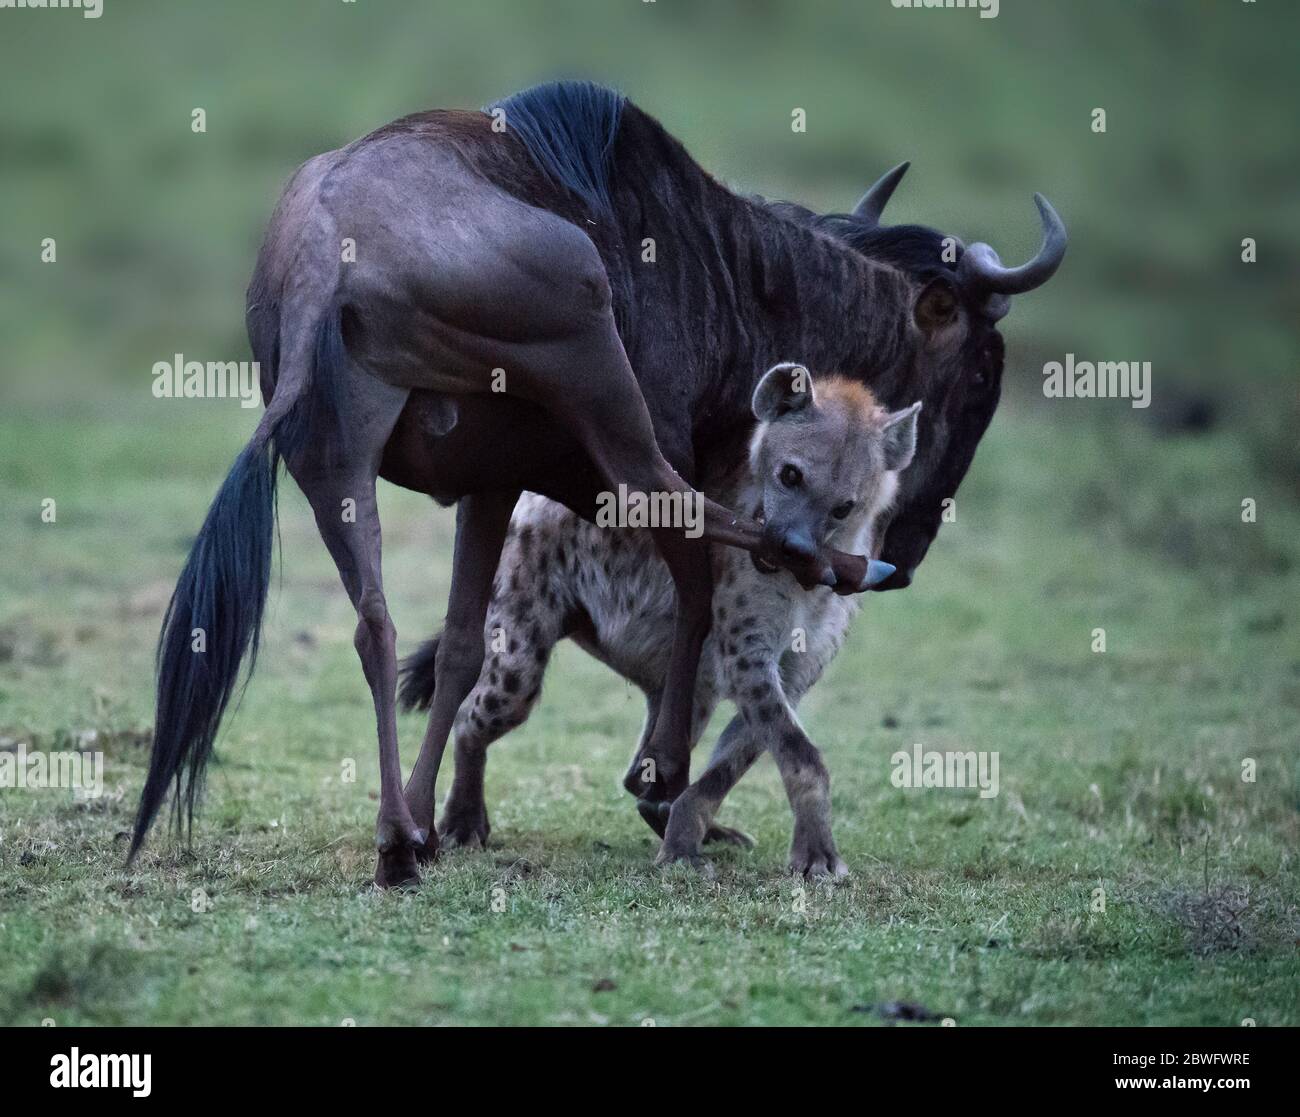 The wildebeest bucked but the determined hyena held fast. KENYA: PHOTOGRAPHER captures the animal kingdom?s David and Goliath as a hyena takes down a Stock Photo